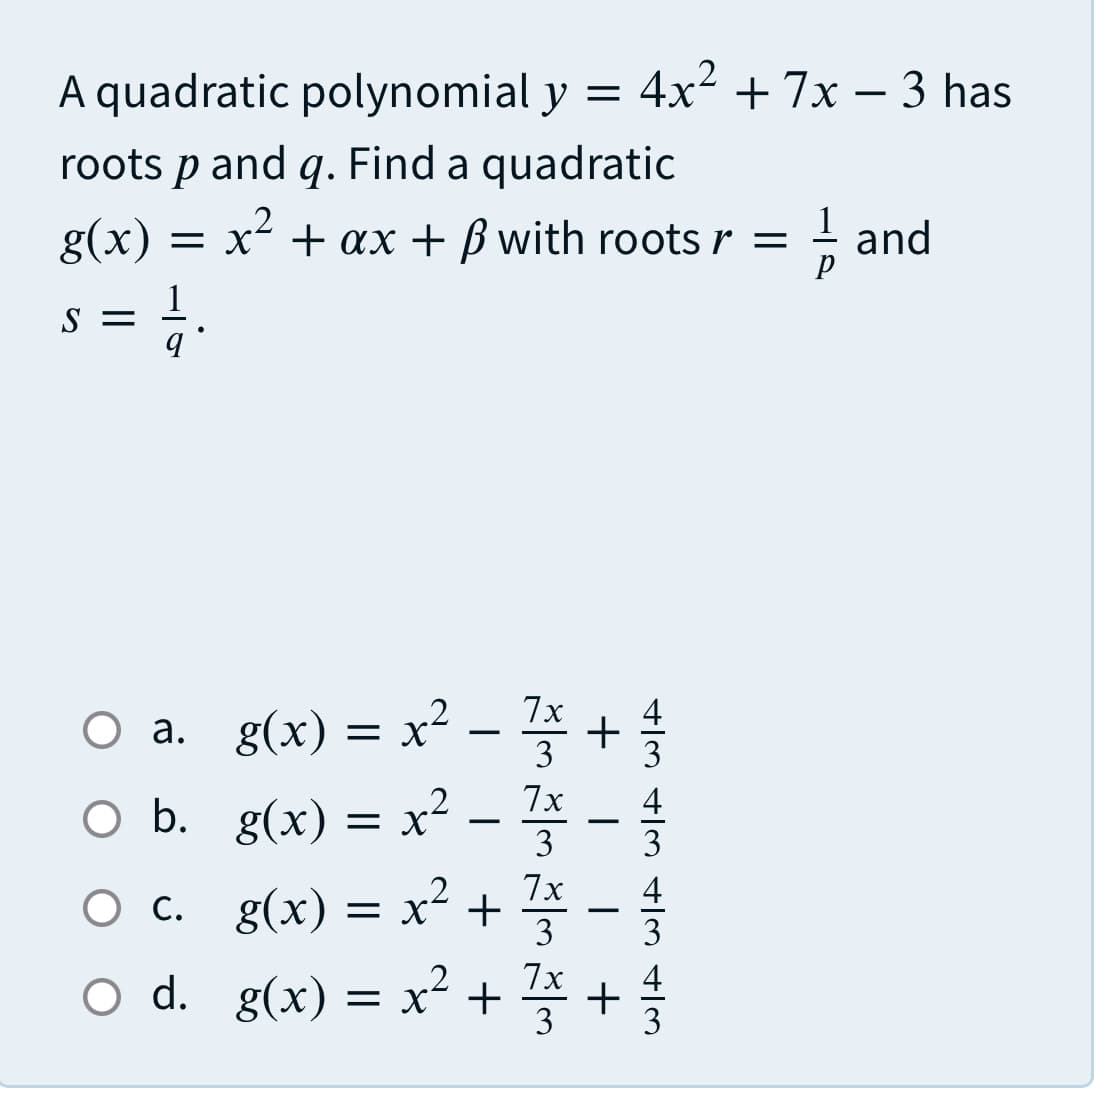 A quadratic polynomial y =
4x2 + 7x – 3 has
roots p and q. Find a quadratic
g(x)
= x + ax + B with roots r =
.2
1
and
S =
O a. g(x) = x² -
O b. g(x) = x² -
7x
а.
3
7x
3
Ос.
g(x) =
7x
x +
3
-
7x
d.
O d. g(x) = x²+
3
+/M 4/3 4|m 4/3
+
+
